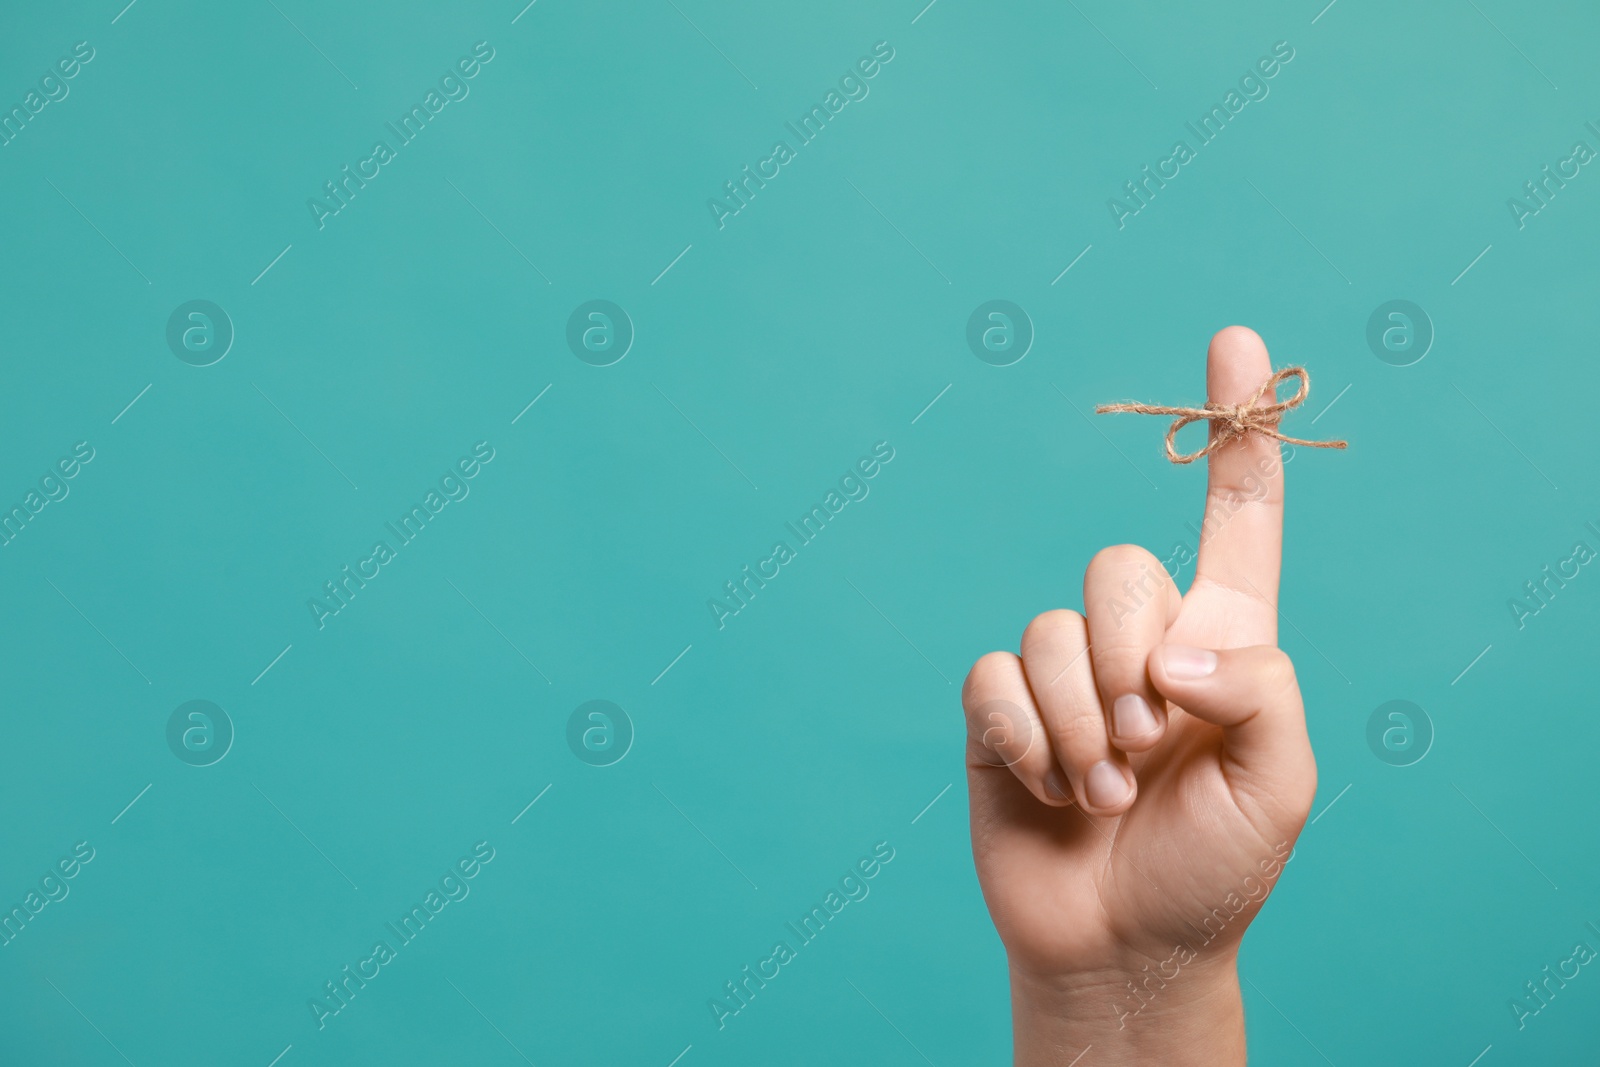 Photo of Man showing index finger with tied bow as reminder on turquoise background, closeup. Space for text